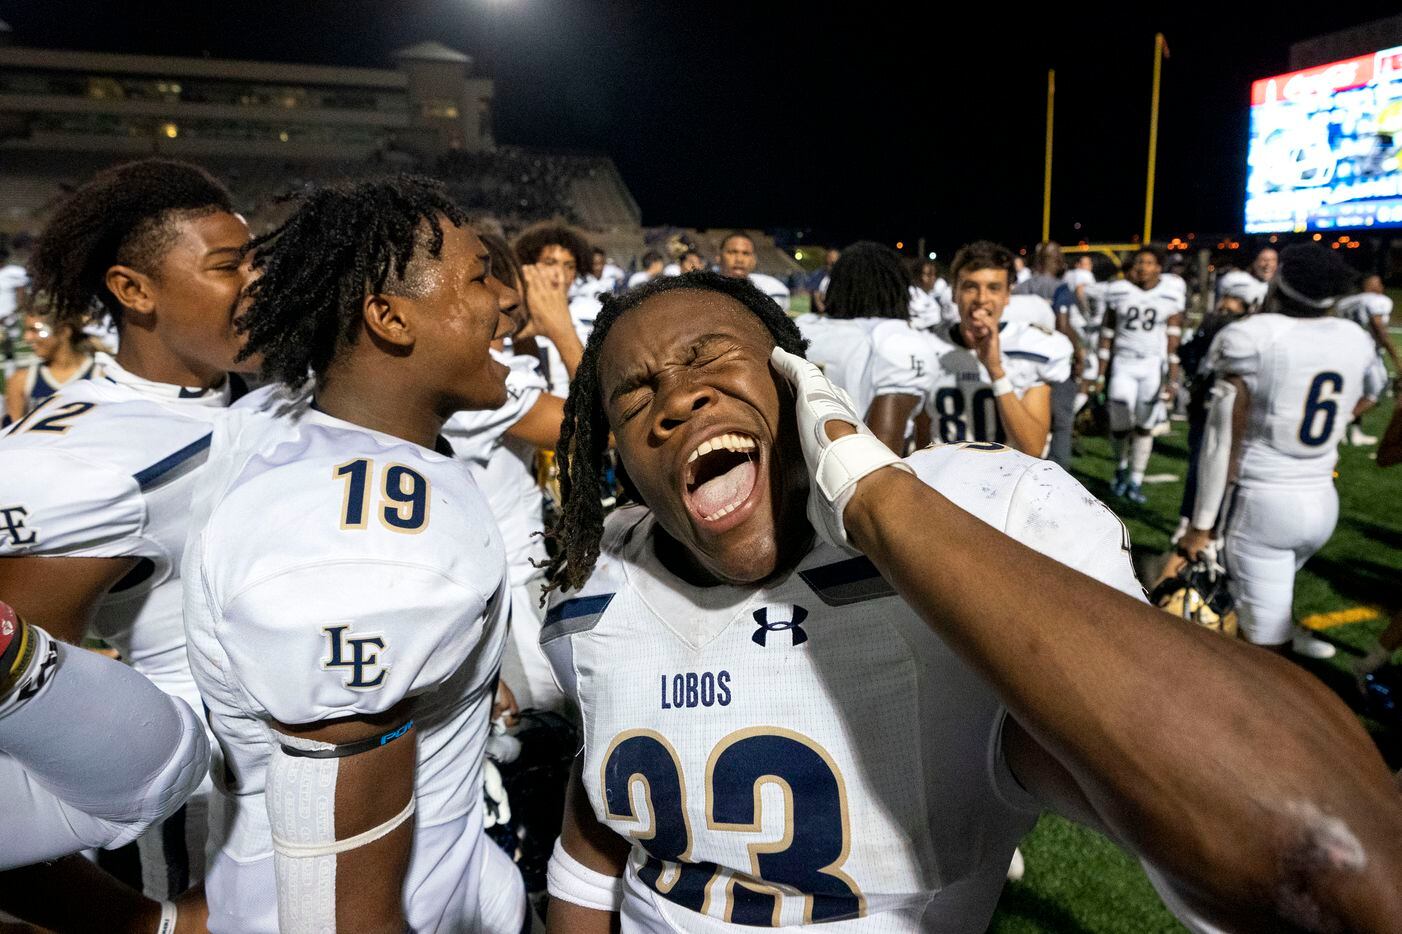 Little Elm sophomore linebacker Osa Adonri (33) leads the crowd in a chant after his team’s 35-31 win over Plano West in a high school football game on Friday, Sept. 10, 2021 at John Clark Stadium in Plano, Texas. (Jeffrey McWhorter/Special Contributor)